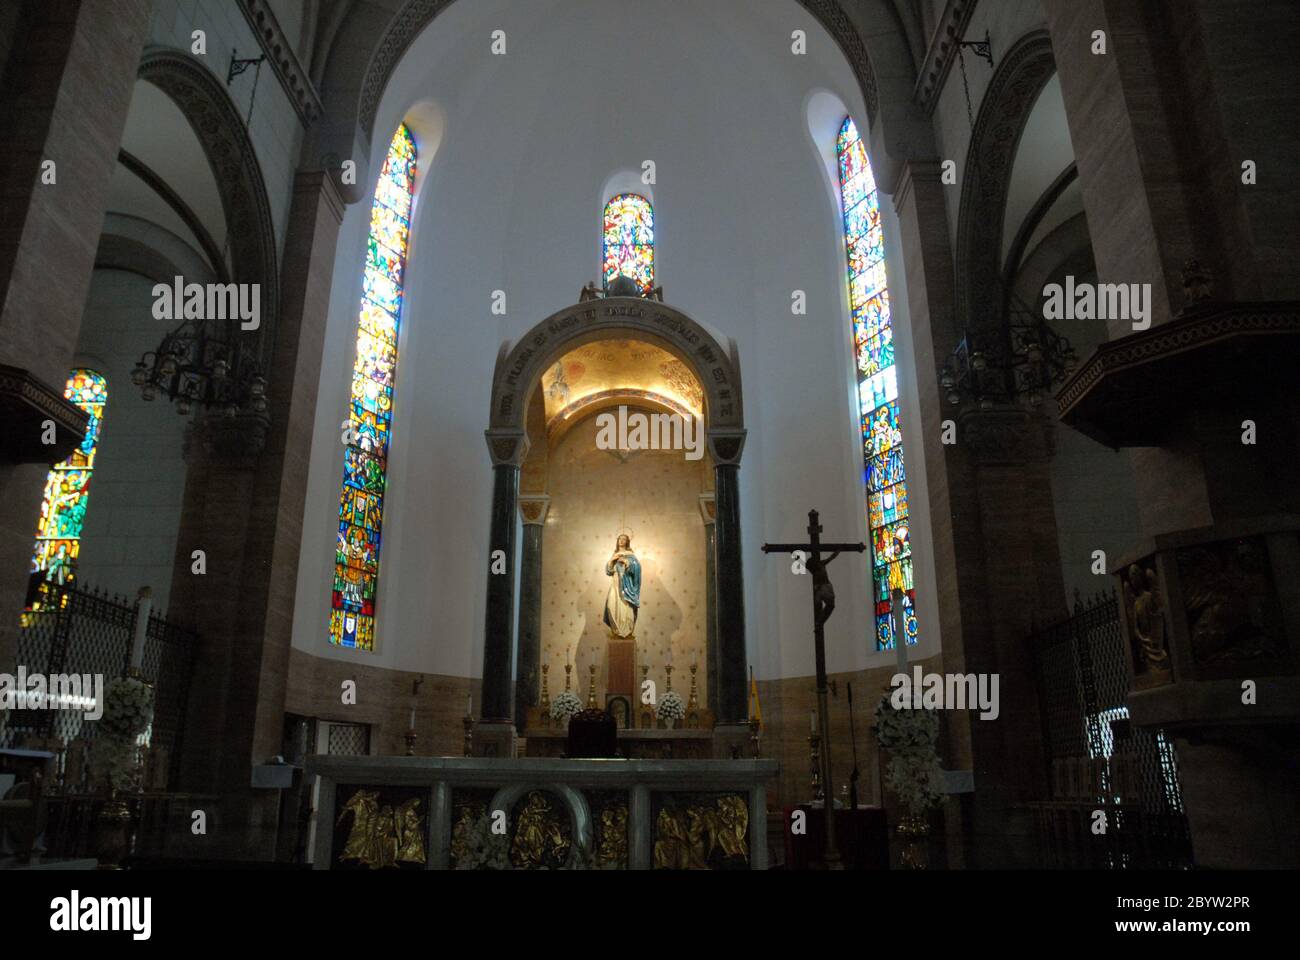 Stained Glass Windows in Manila Cathedral, Intramuros, Philippines. Stock Photo